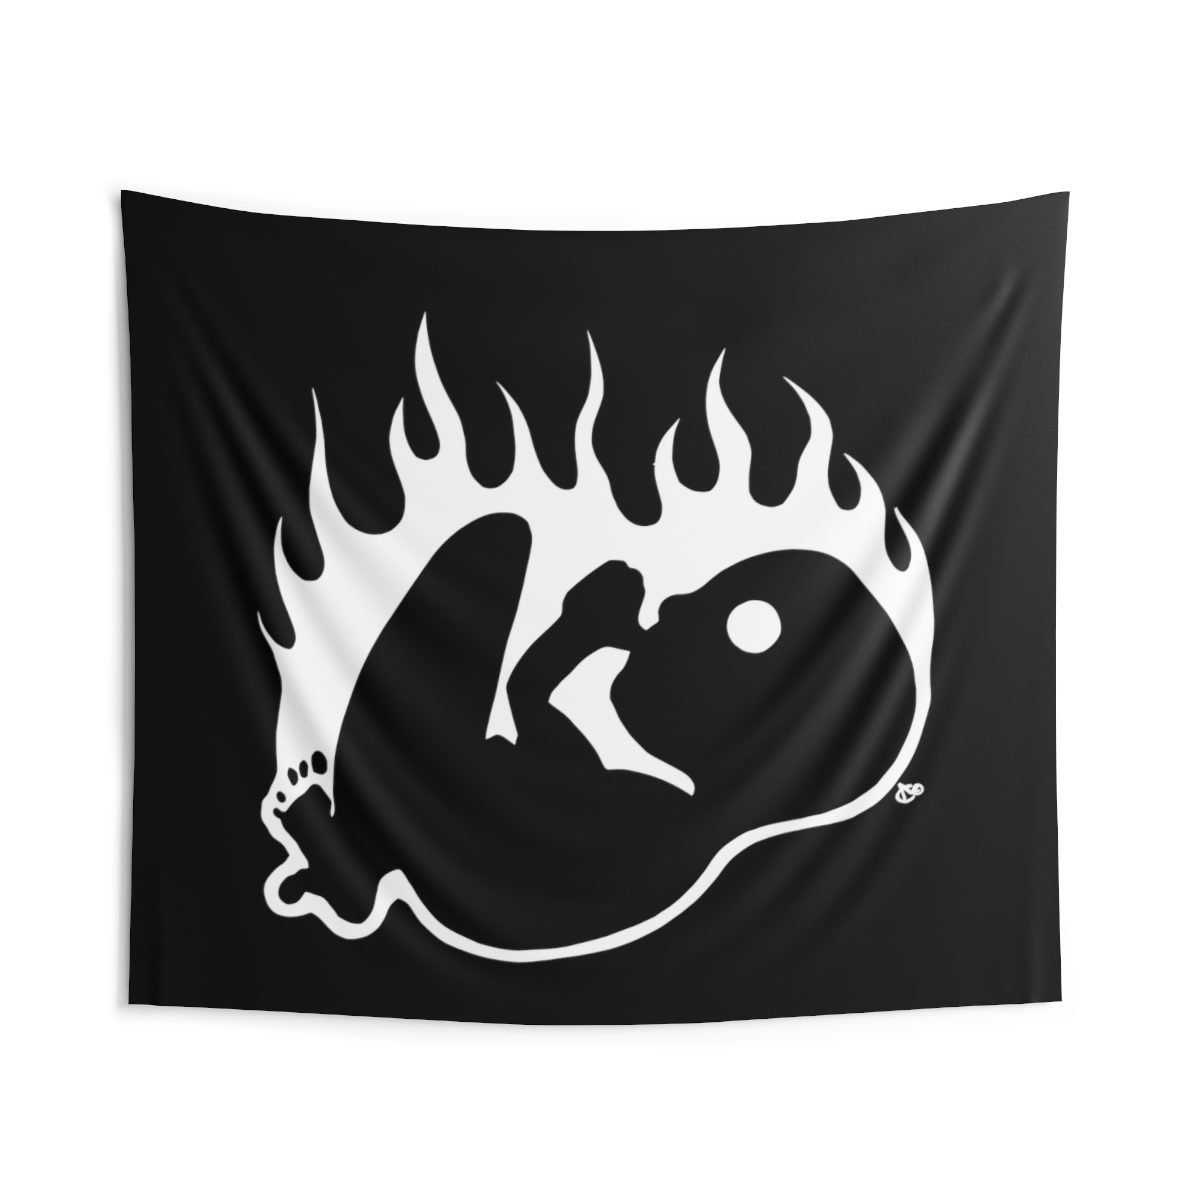 Fetus On Fire by The Wounded Society Indoor Wall Tapestries